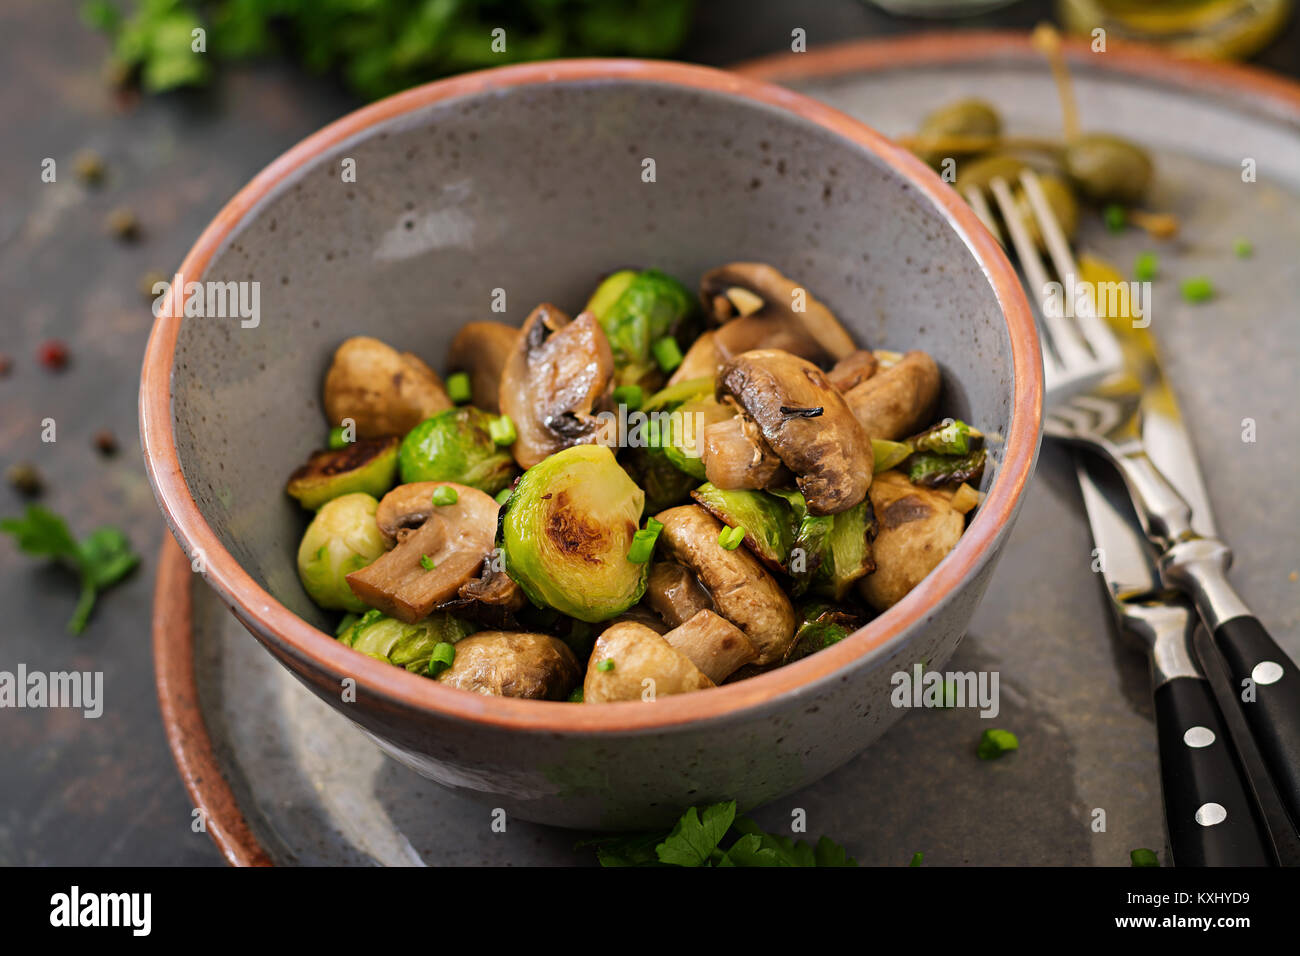 Vegan dish. Baked mushrooms with Brussels sprouts and herbs. Proper nutrition. Healthy lifestyle Stock Photo